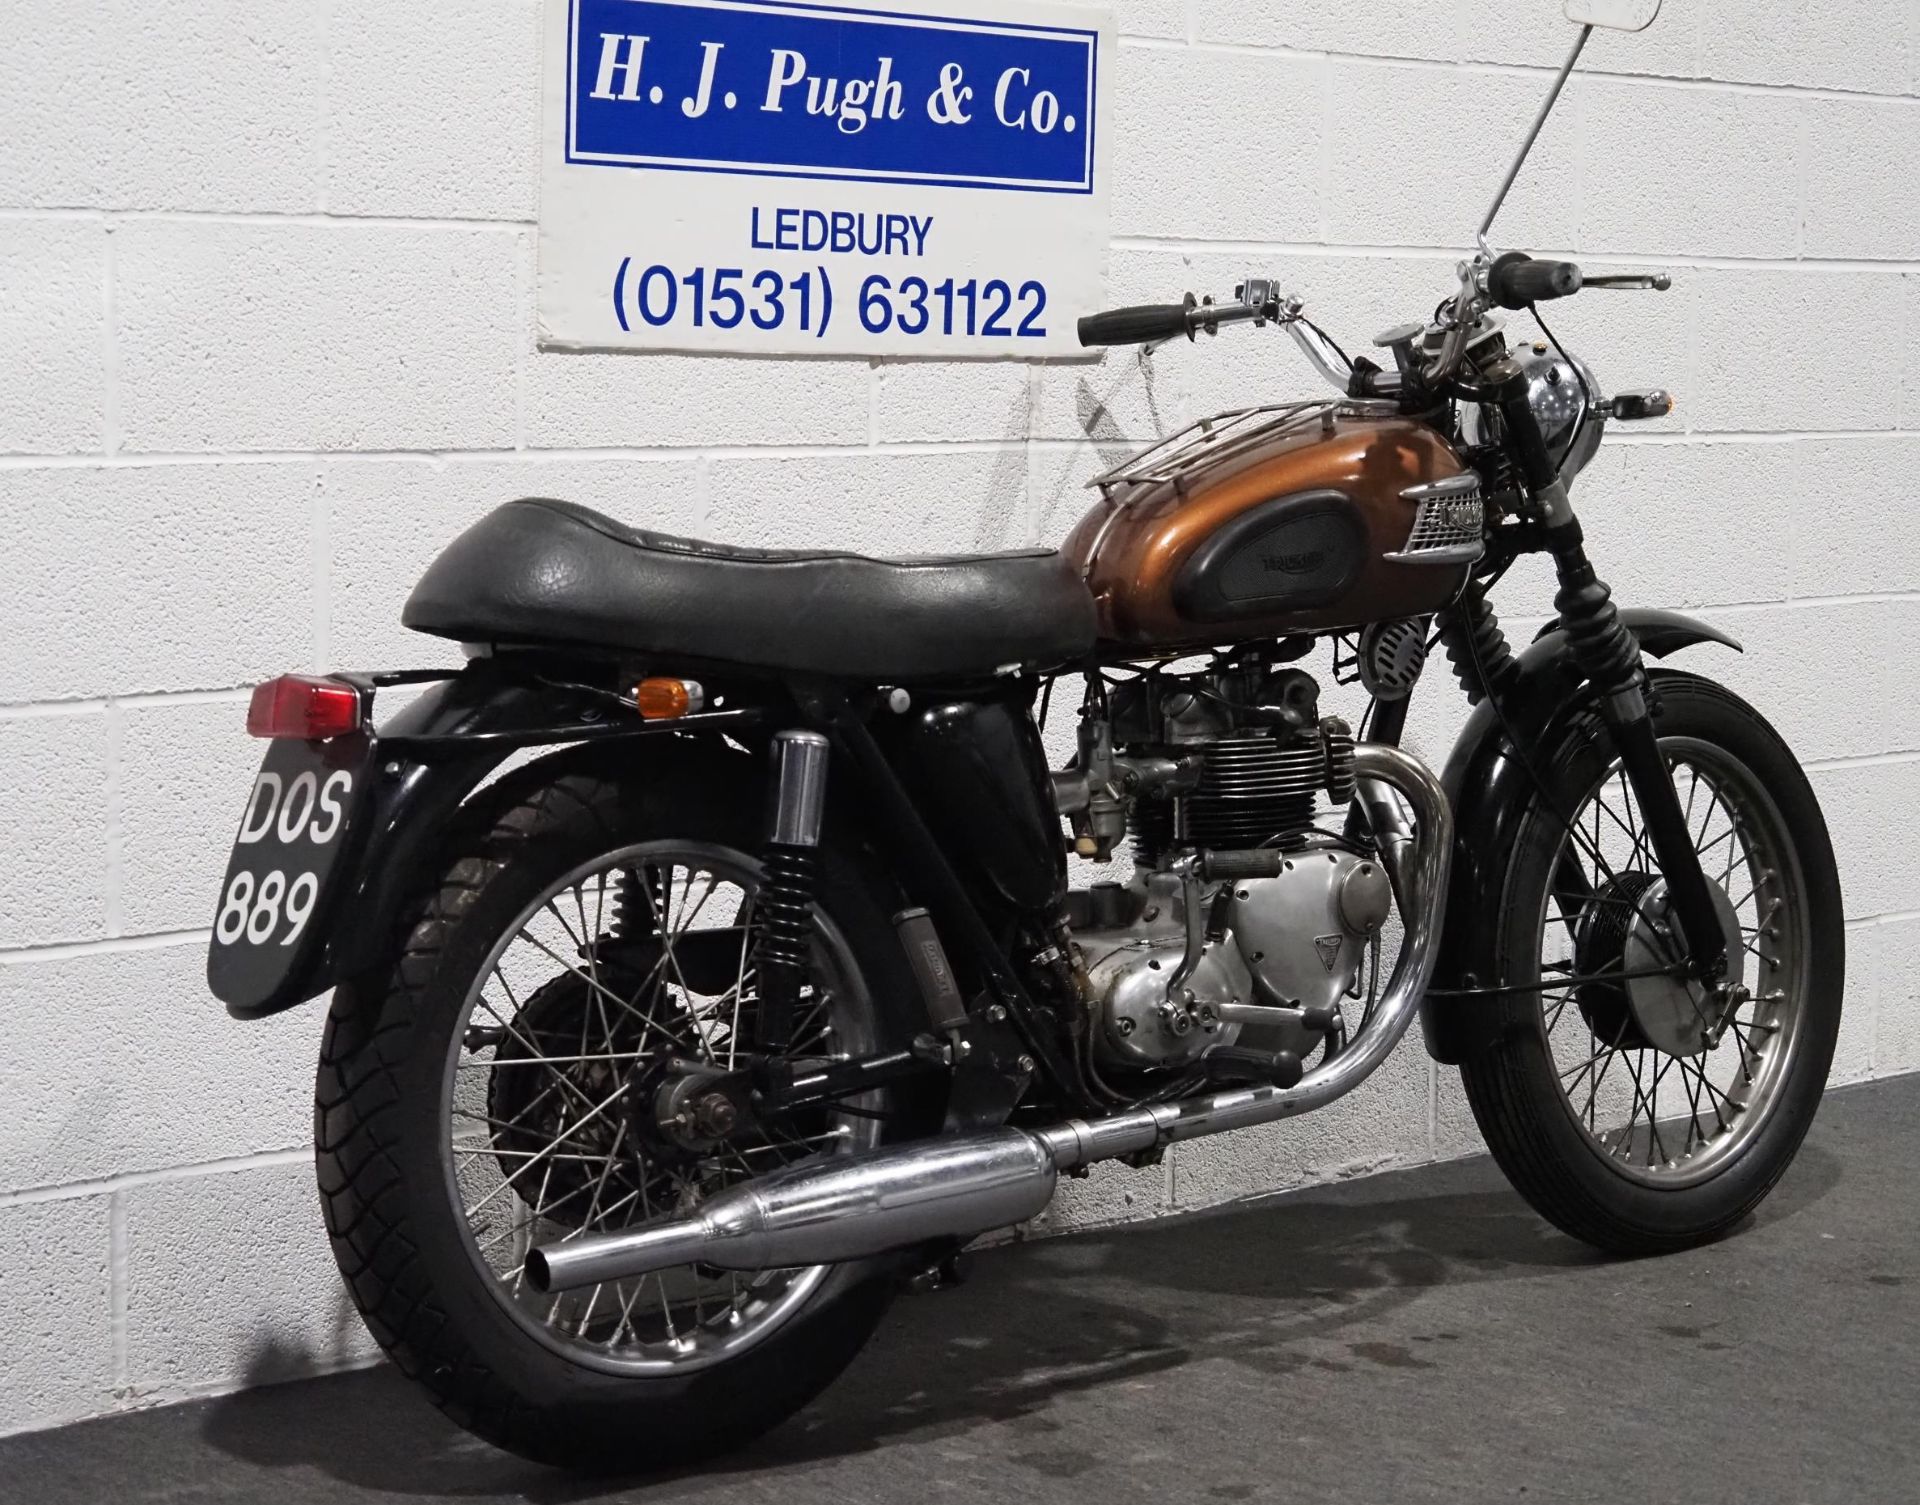 Triumph Tiger 90 motorcycle. 1960. 500cc. Frame No. H2668. Does not match V5. Engine No. H43424. - Image 3 of 6